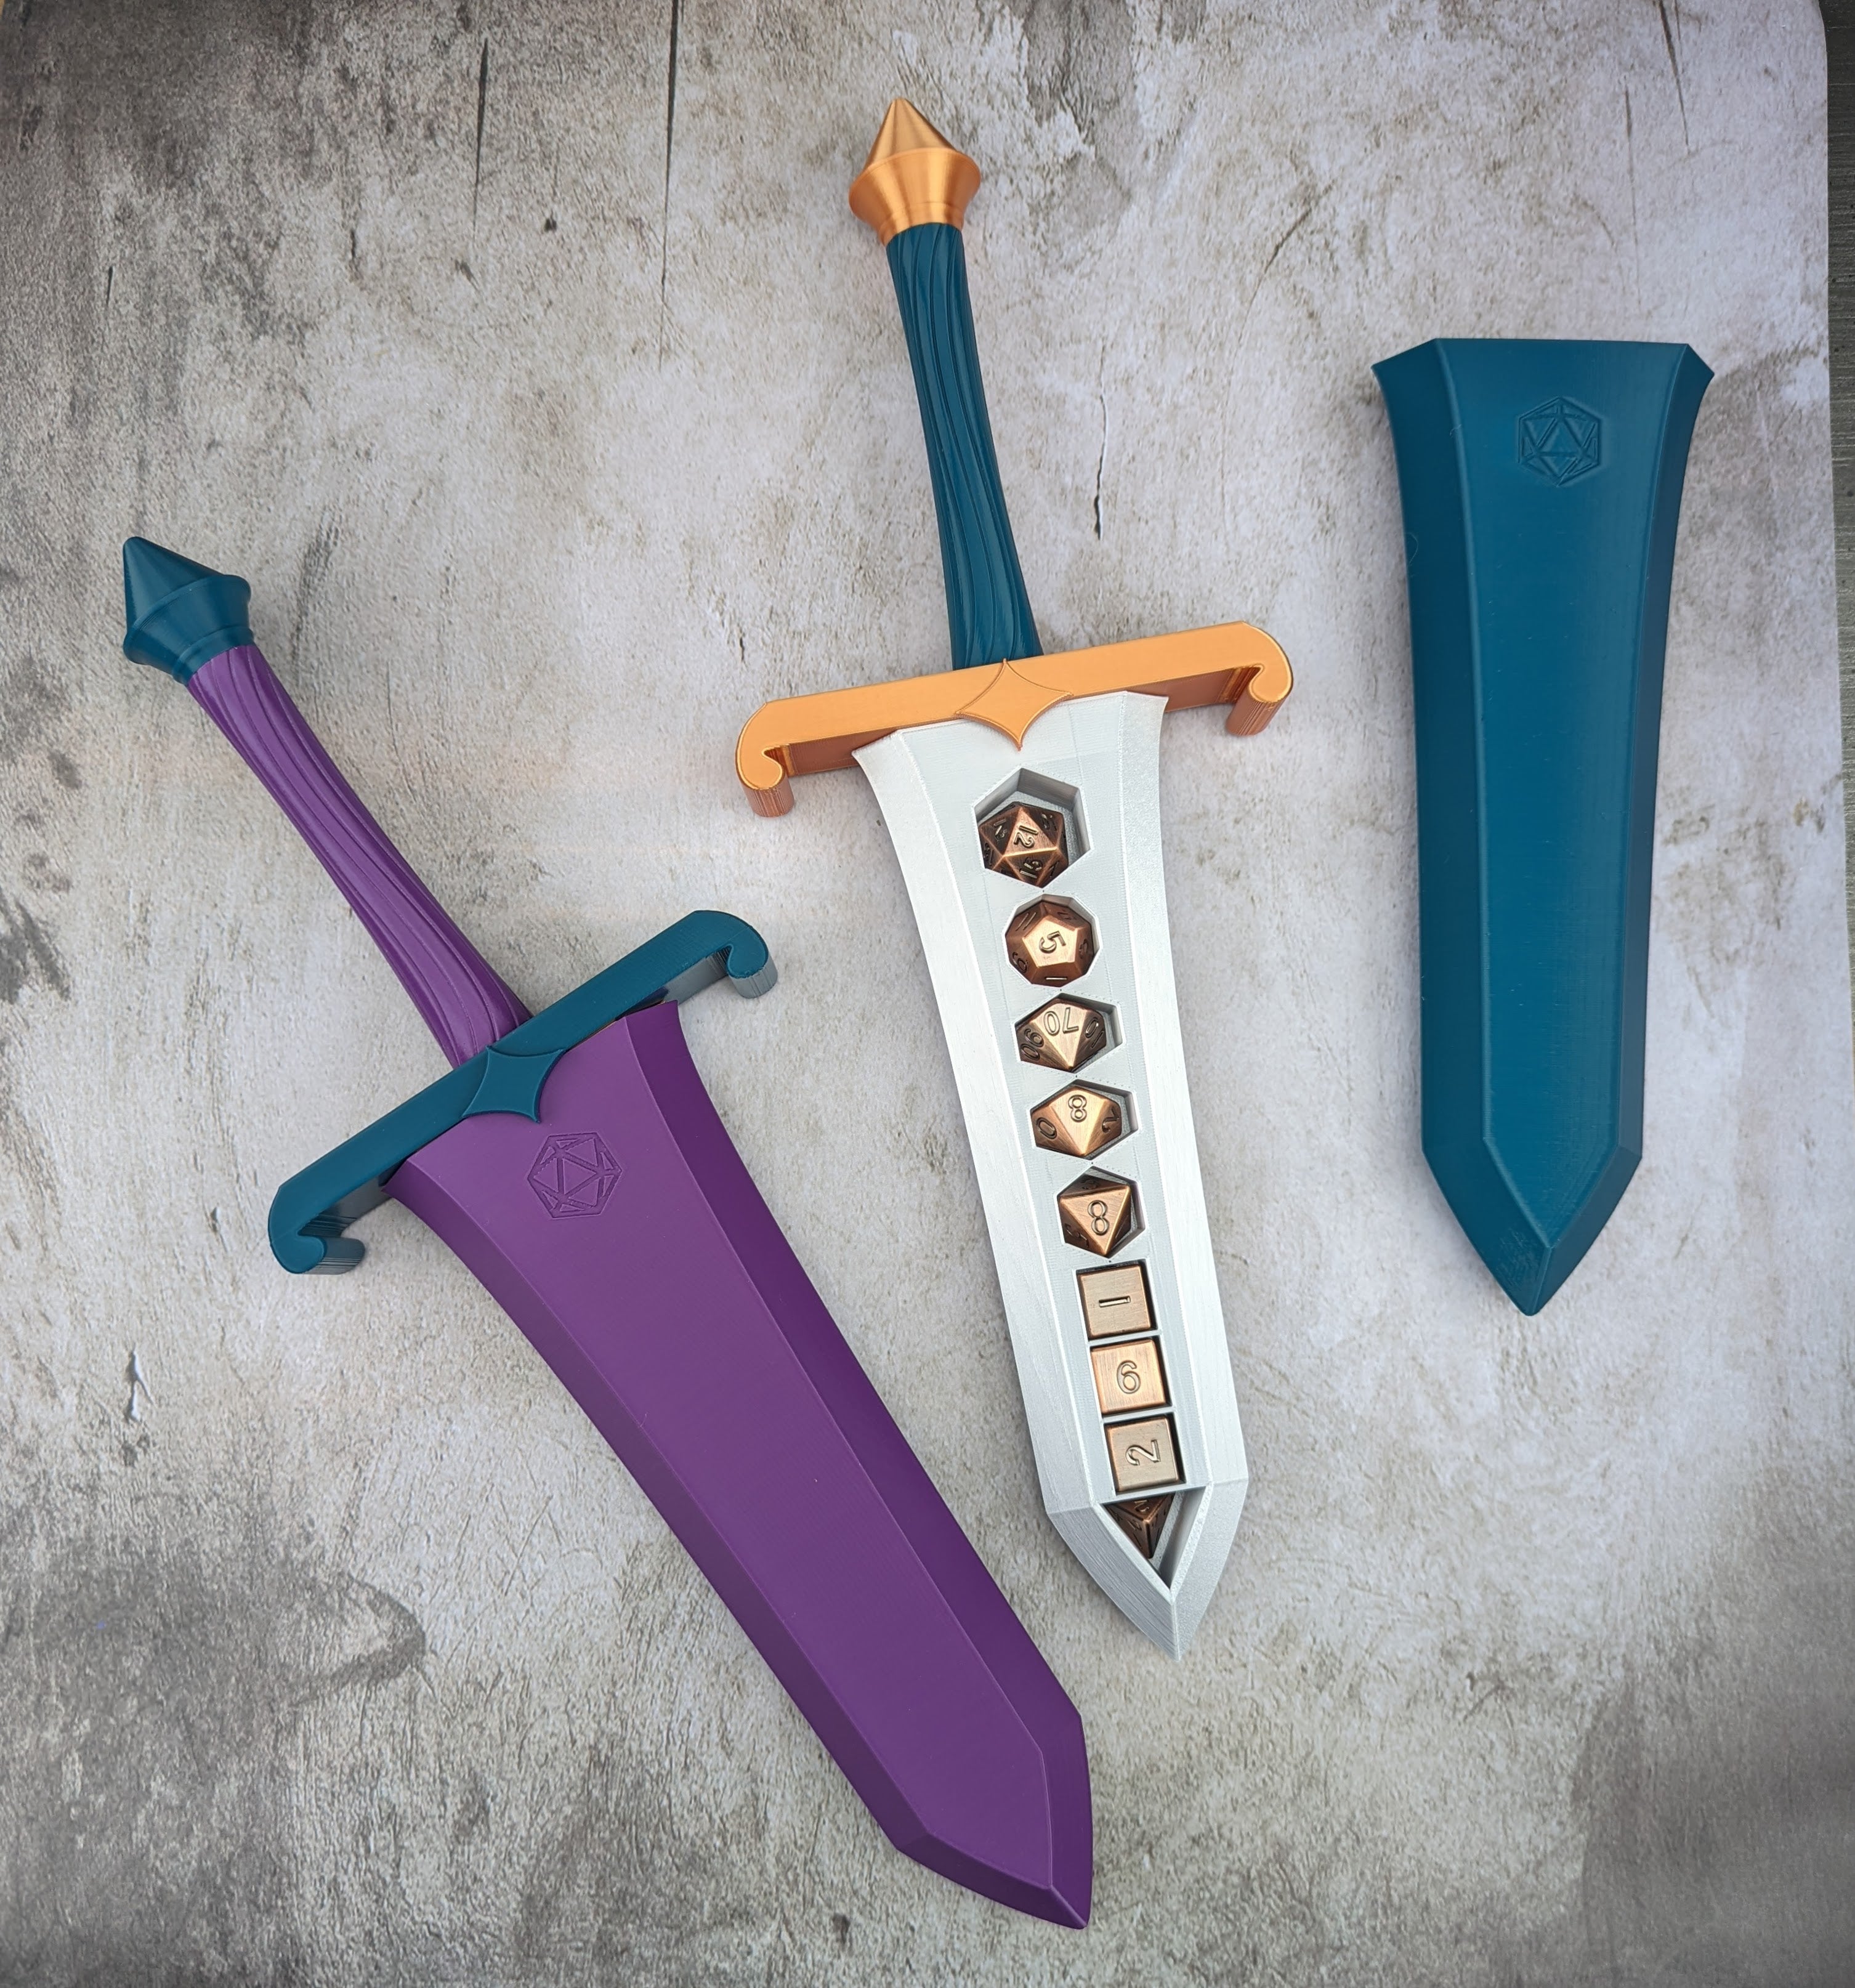 The Dice Sword: STL Download for 3D Printing